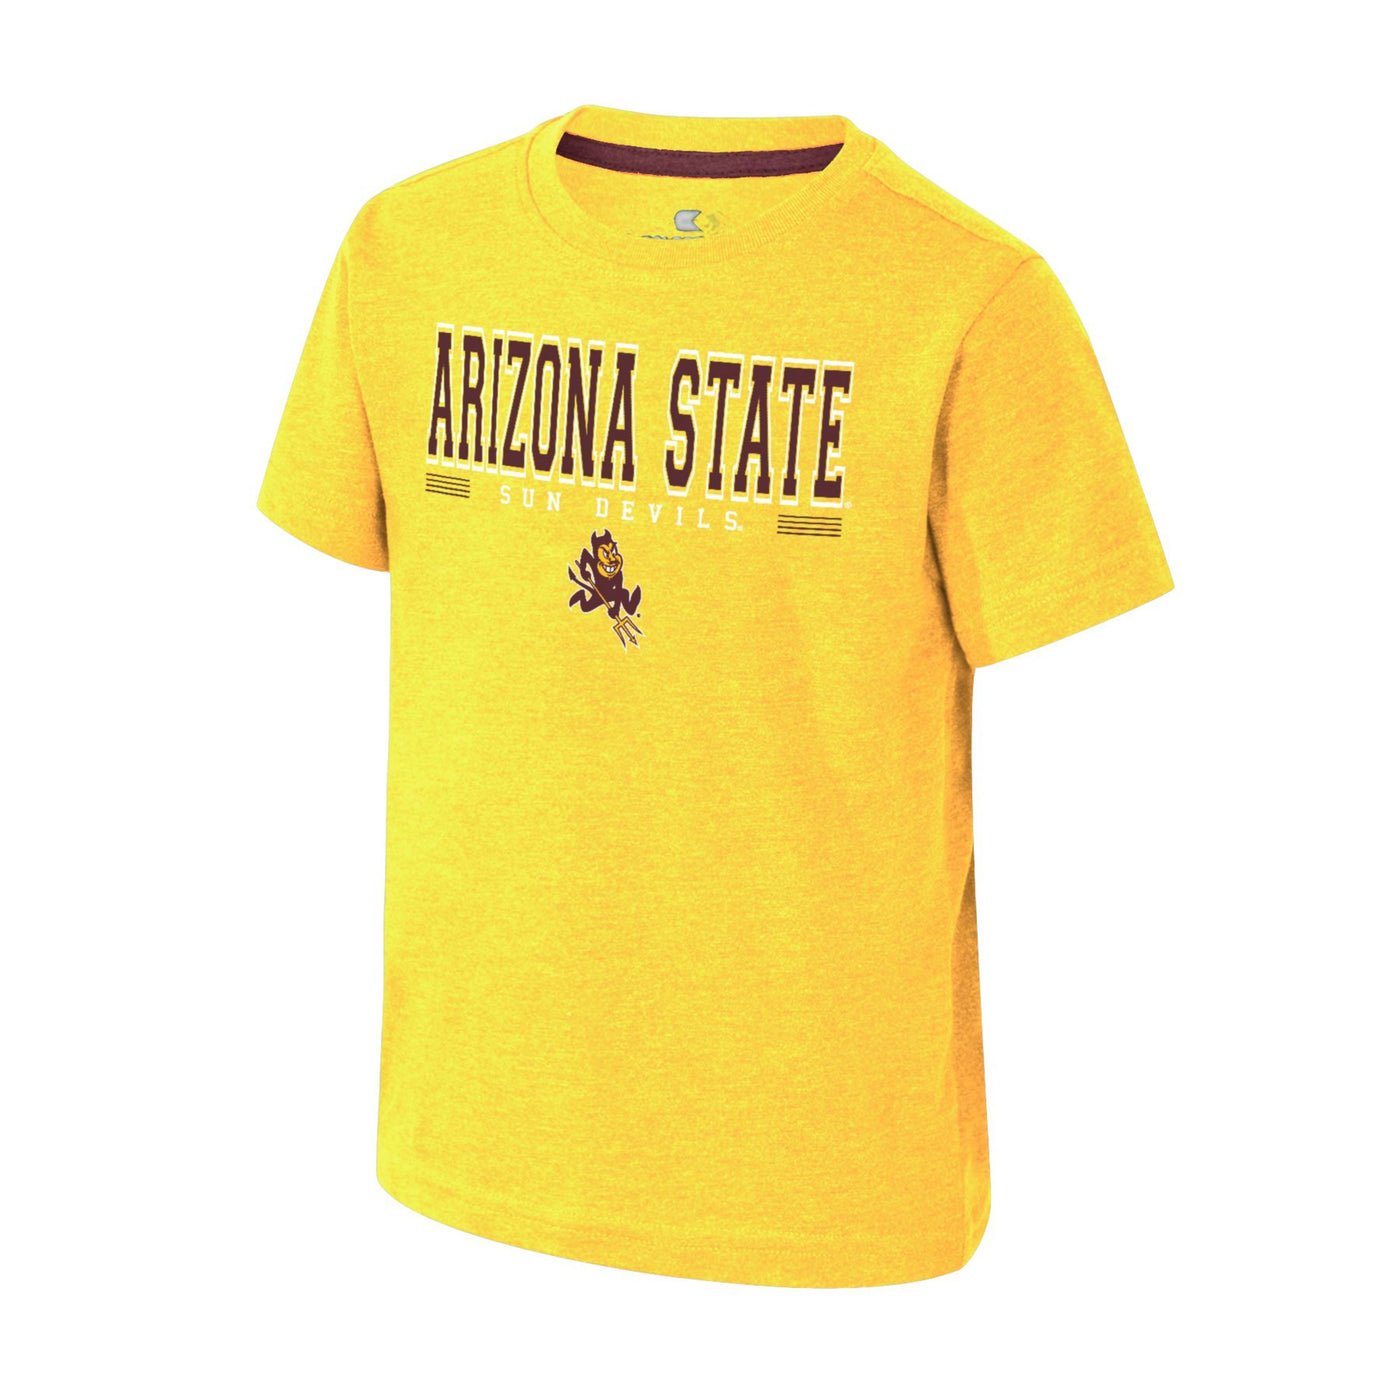 ASU gold toddler tee with the text 